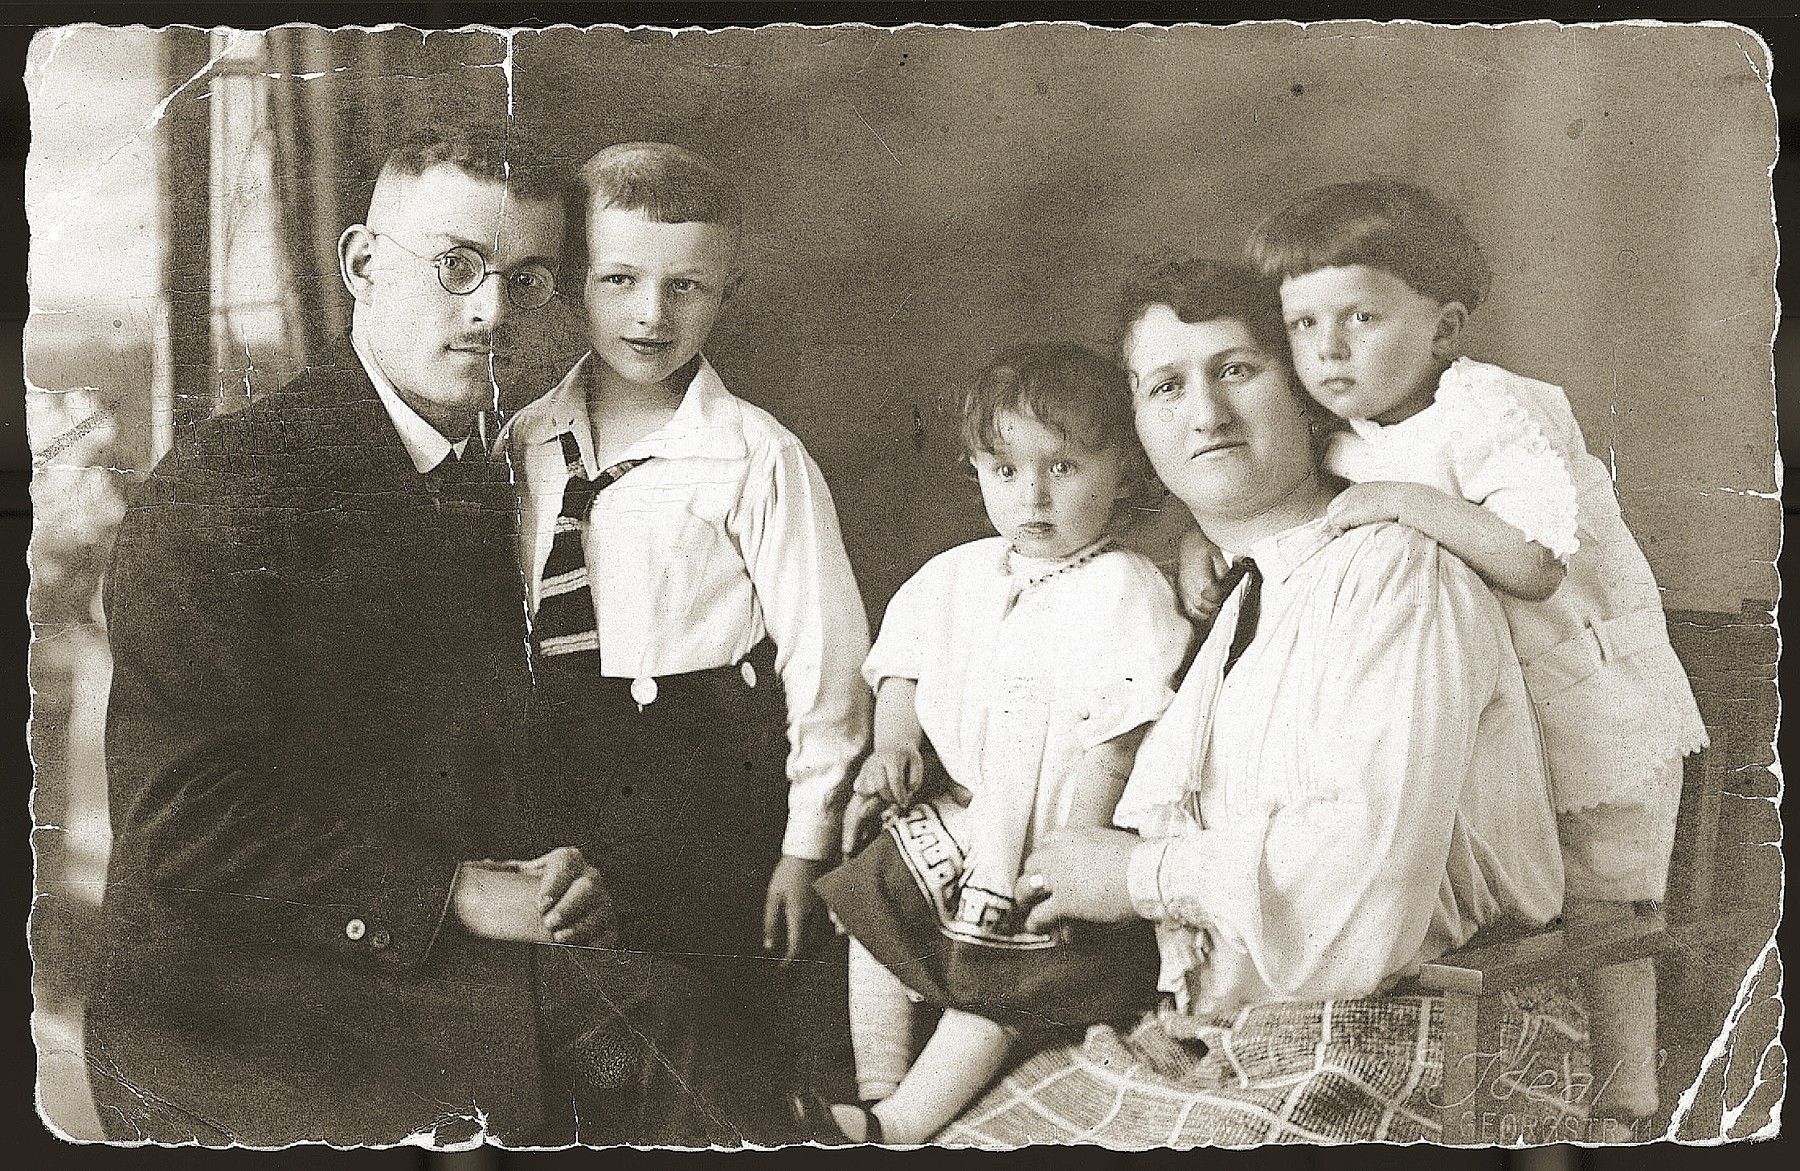 Portrait of the Gruengras family.  

Pictured from left to right are: Nachman, Josef David, Frieda, Ester and Isidor Gruengras.